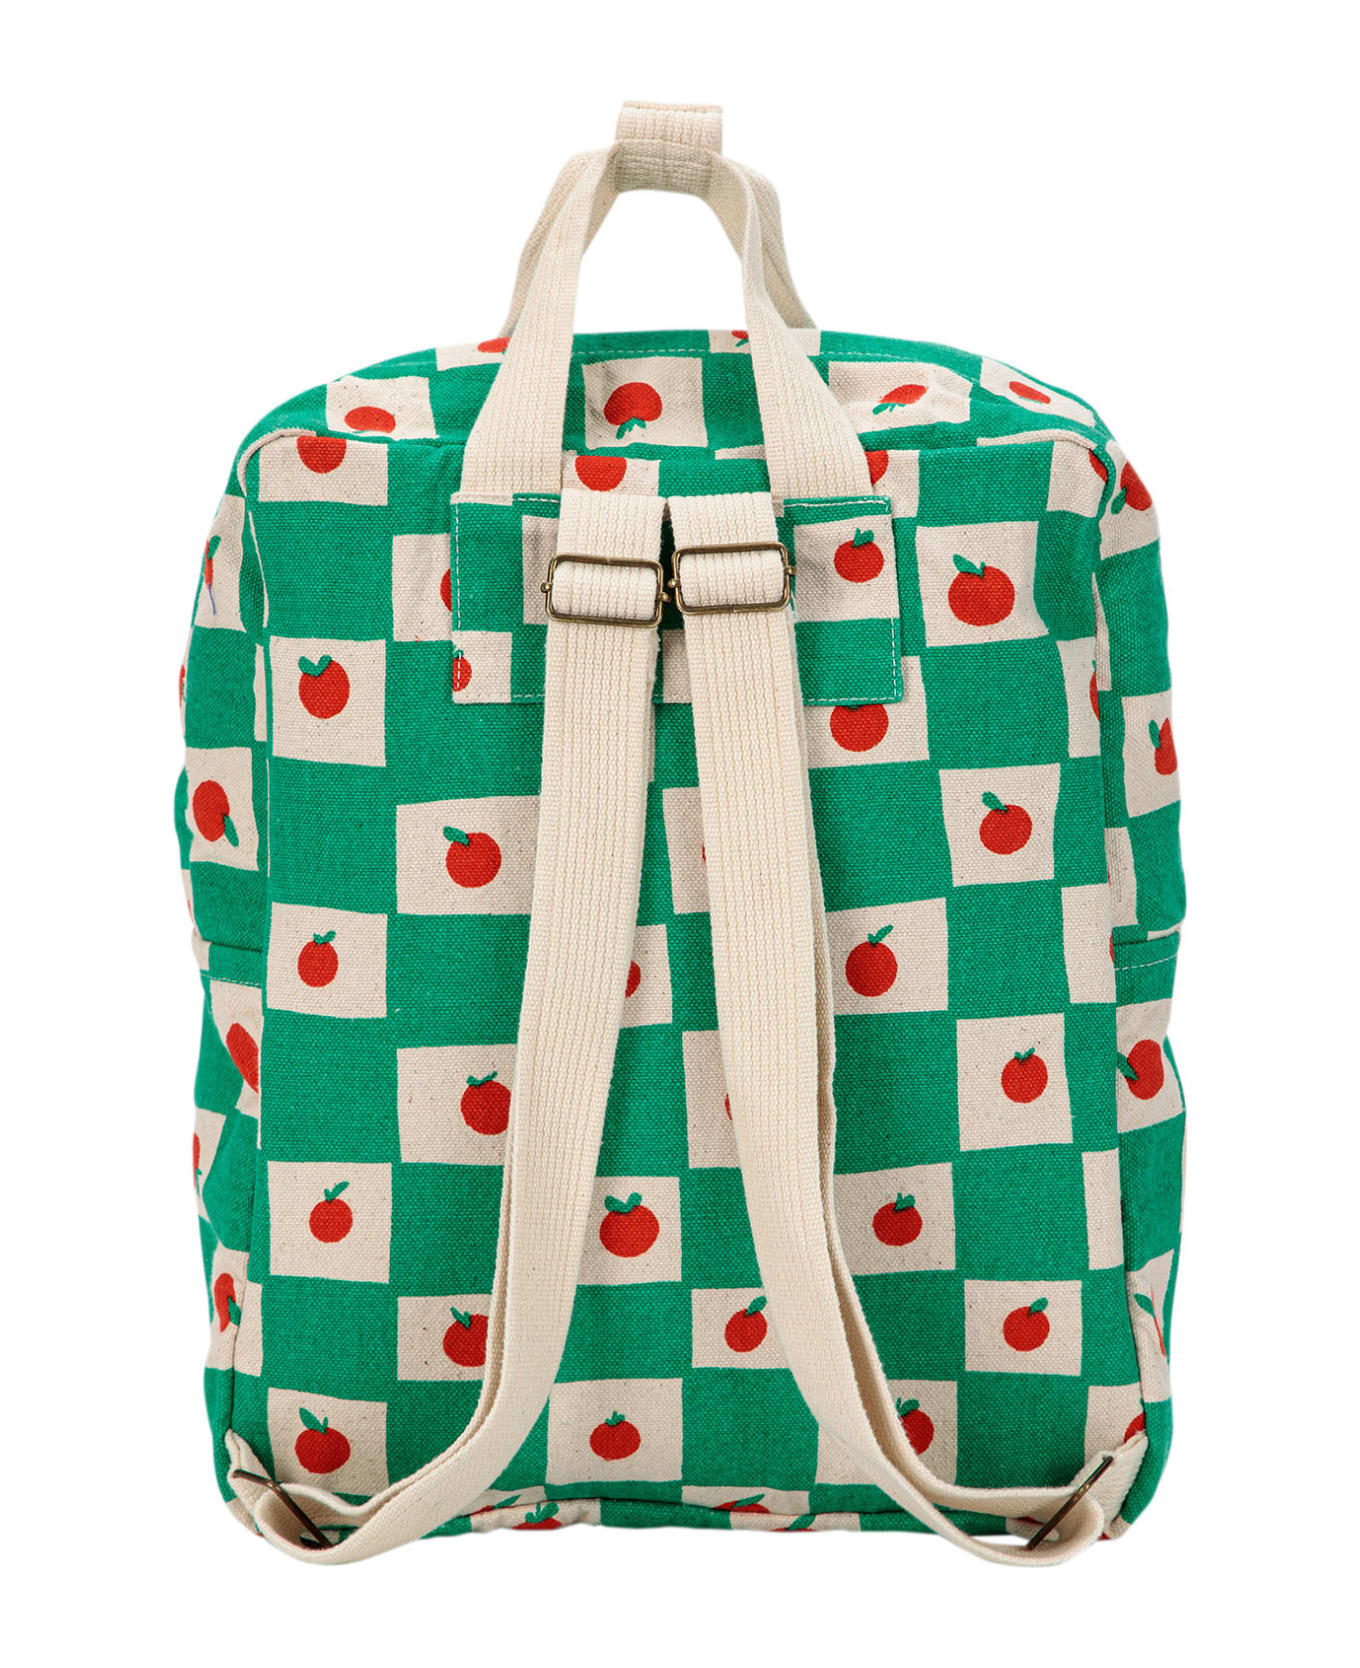 Bobo Choses Green Backpack With Tomatoes For Kids - Green